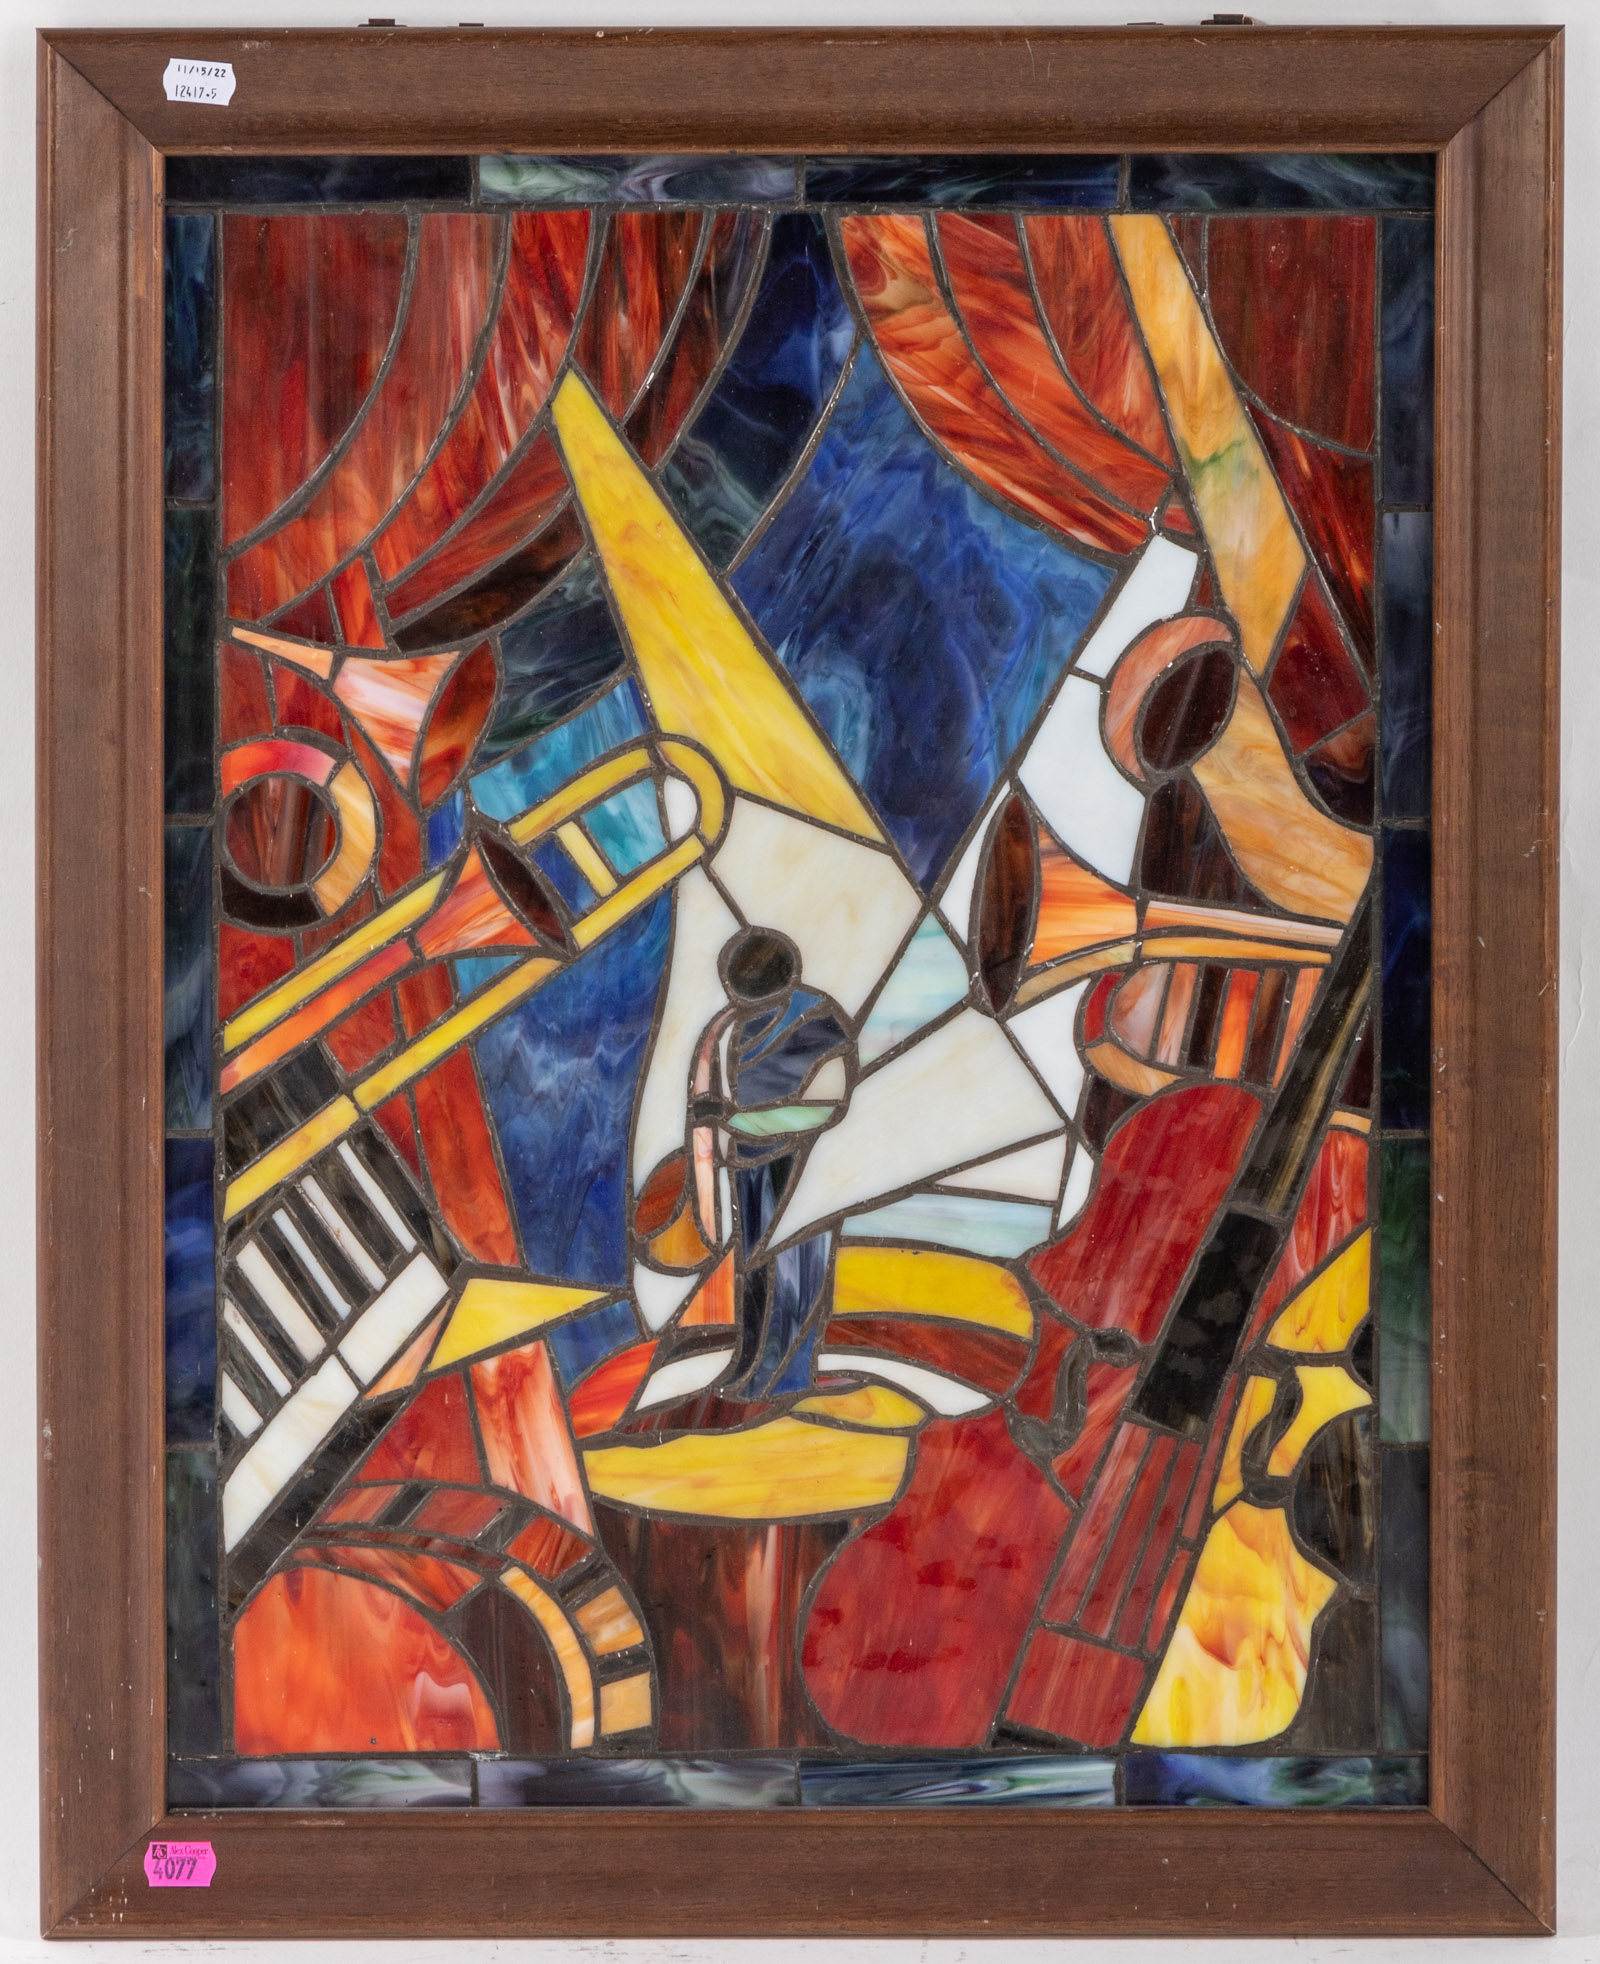 JAZZ THEMED STAINED GLASS WINDOW 2eac0b